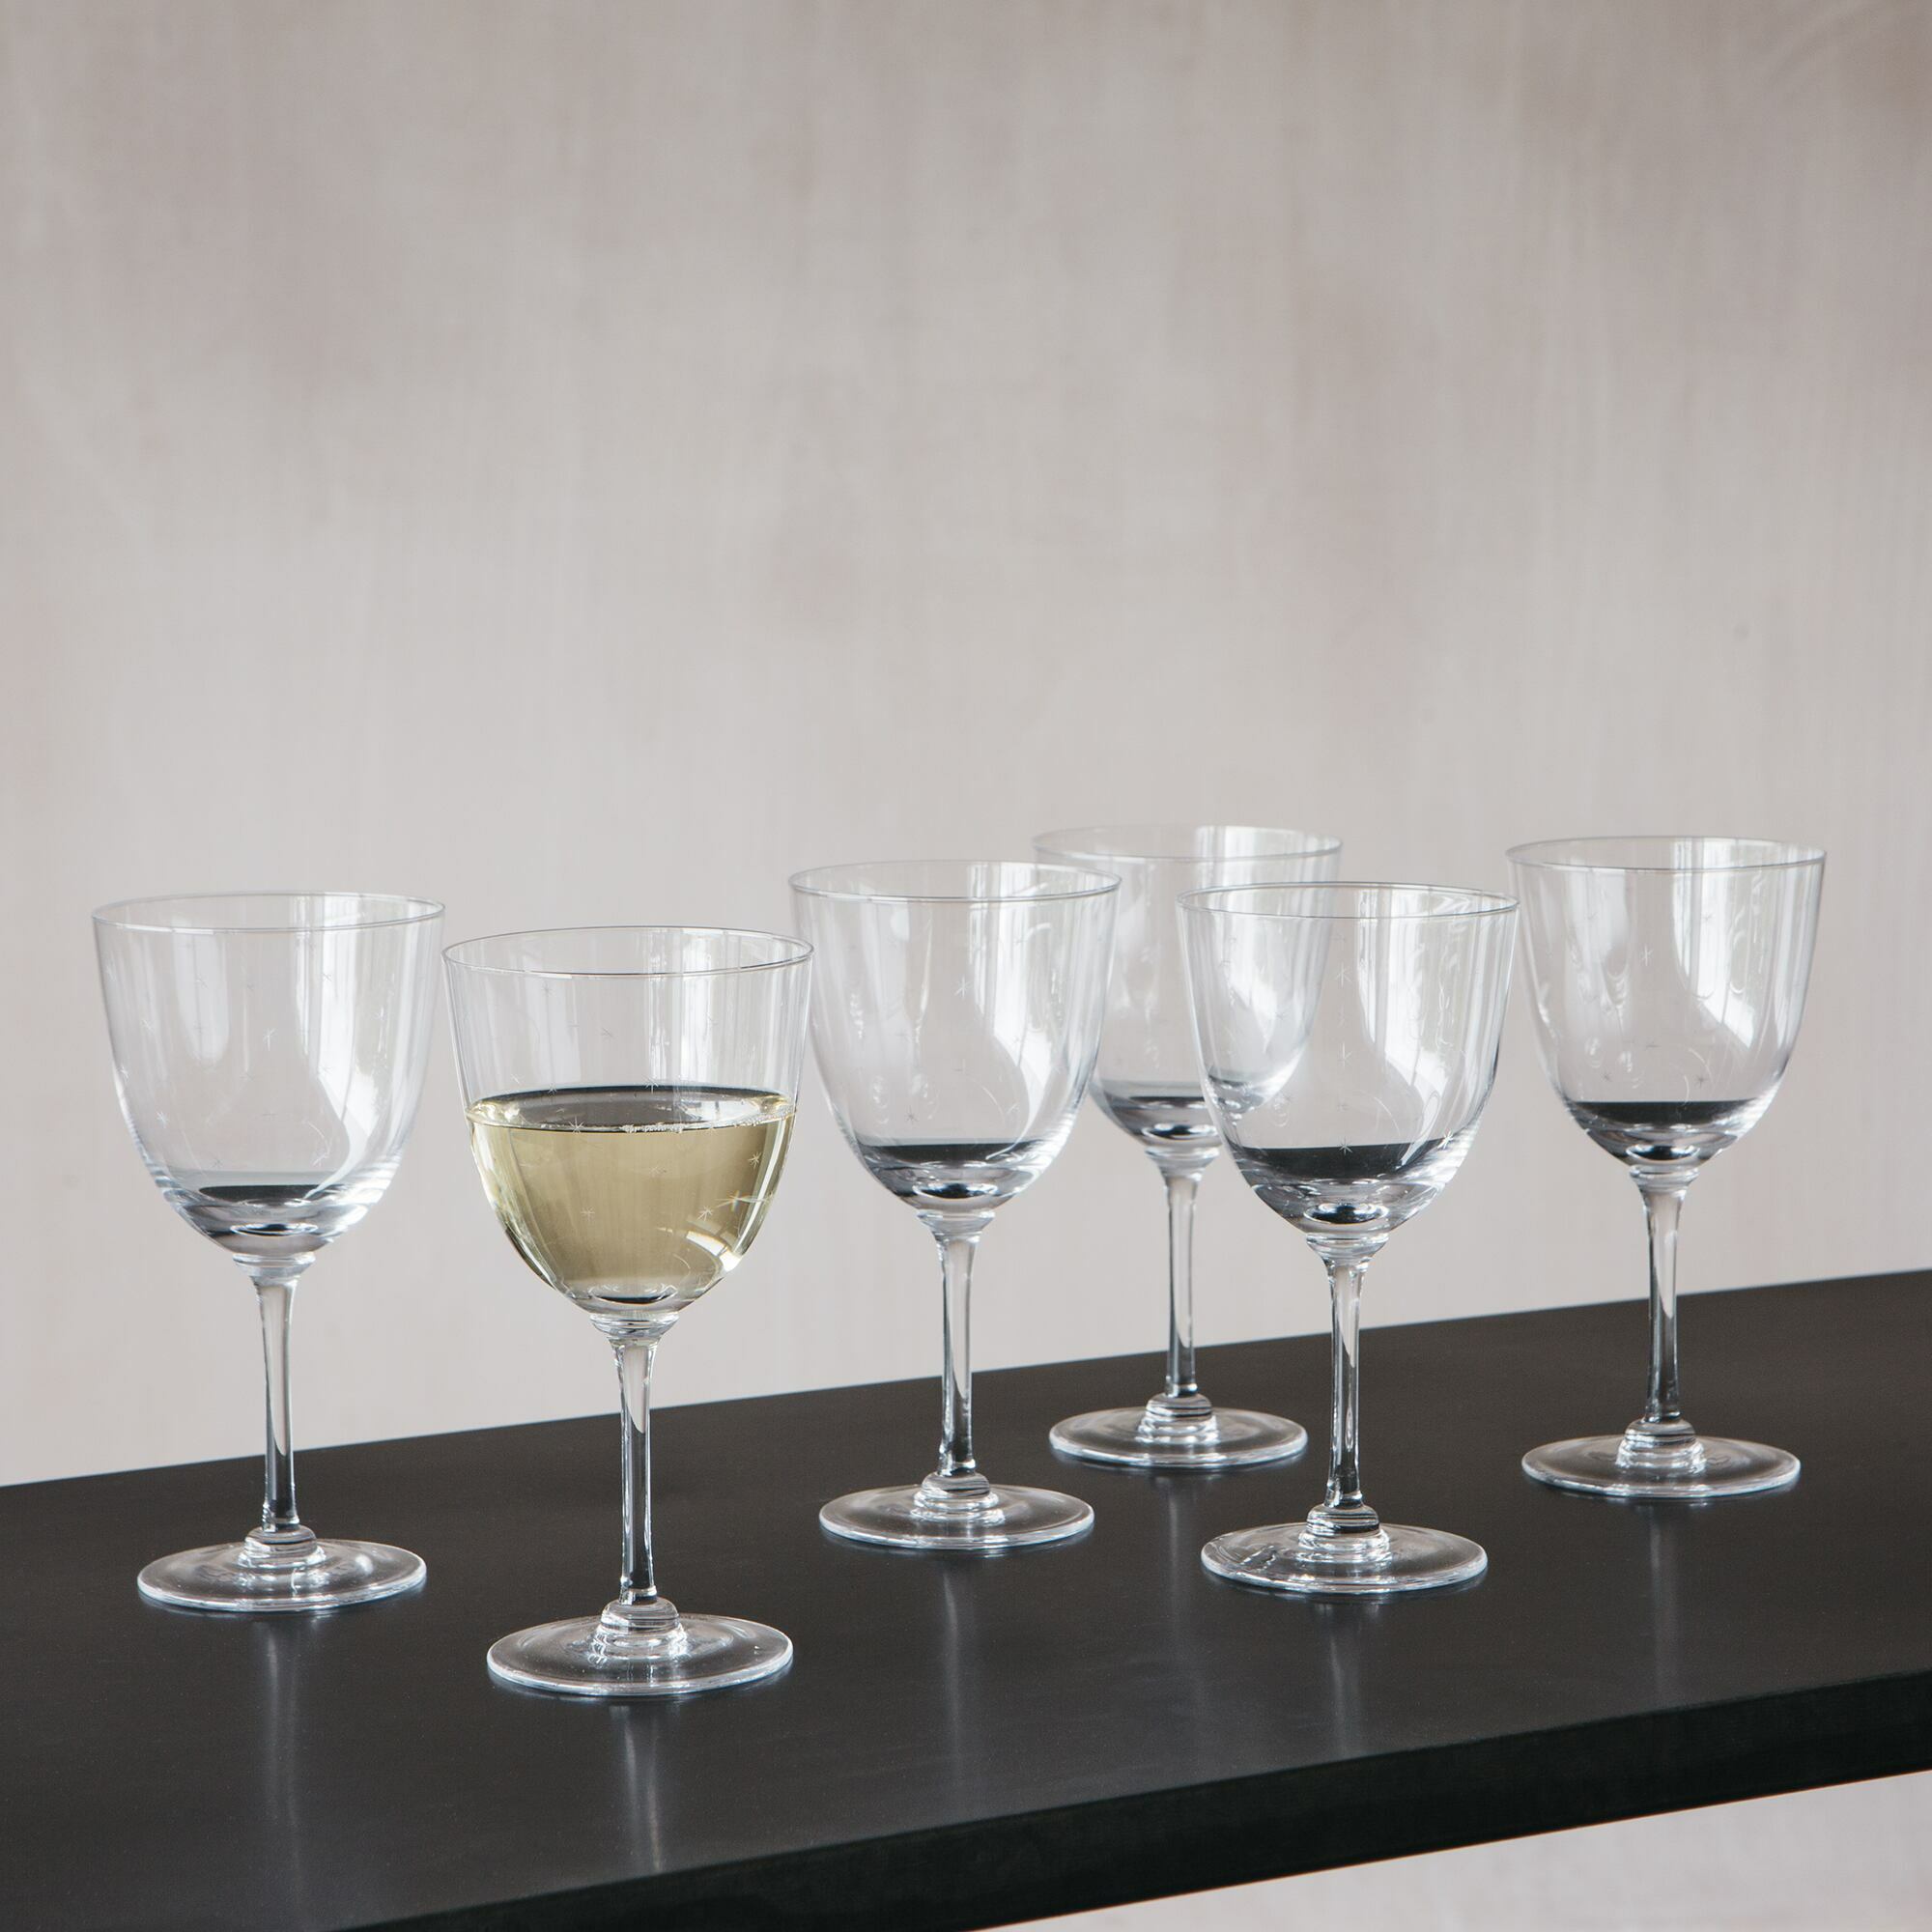 Read more about Graham and green set of six stars crystal wine glasses